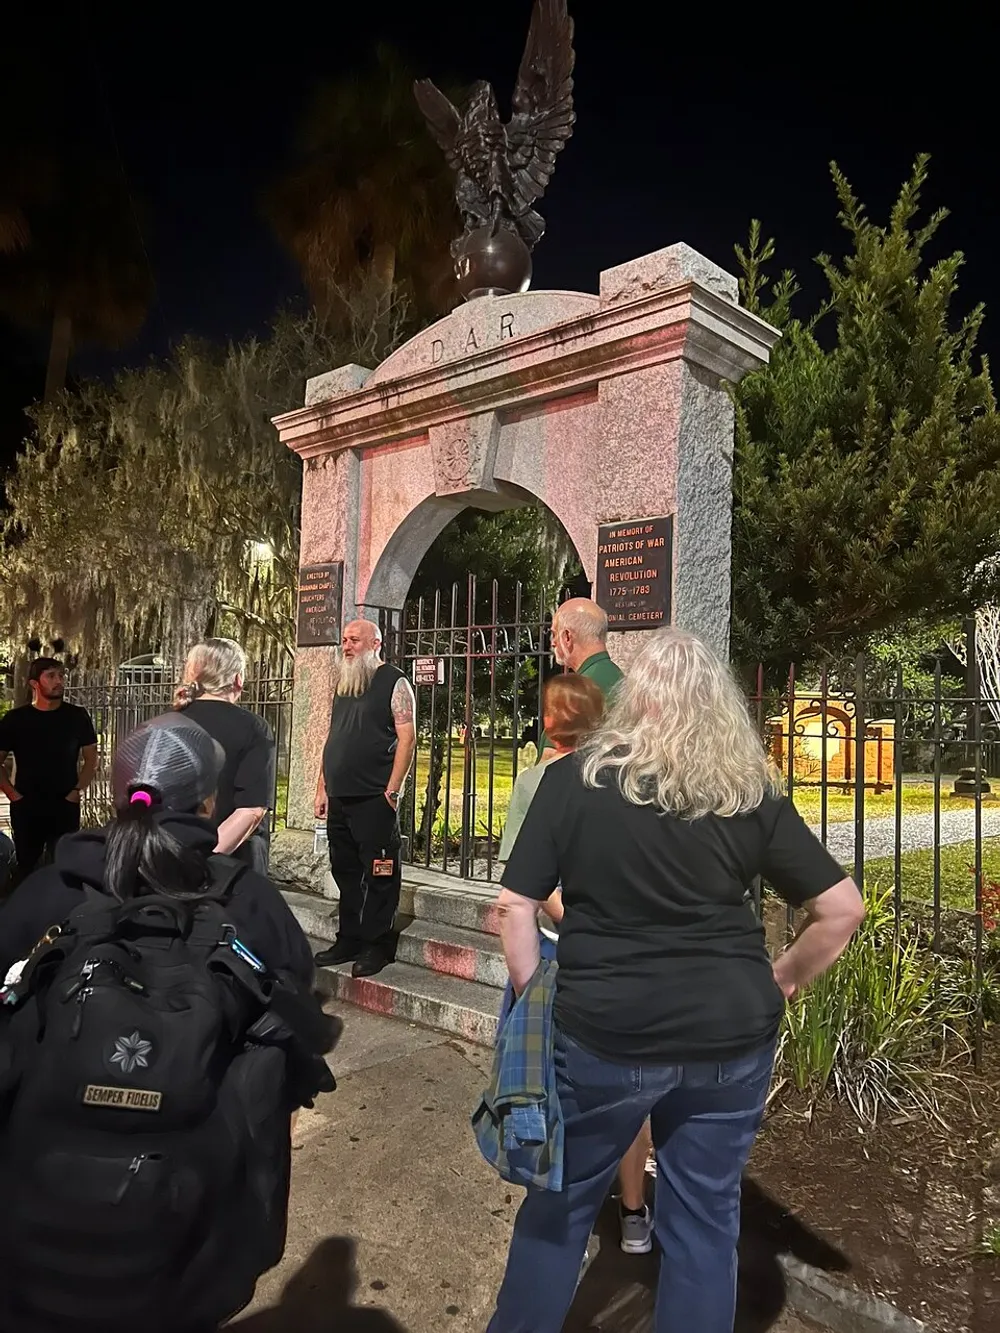 A group of people is gathered at night around a historic monument with the inscription DAR and an eagle statue on top commemorating the patriots of the American Revolutionary War from 1775-1783